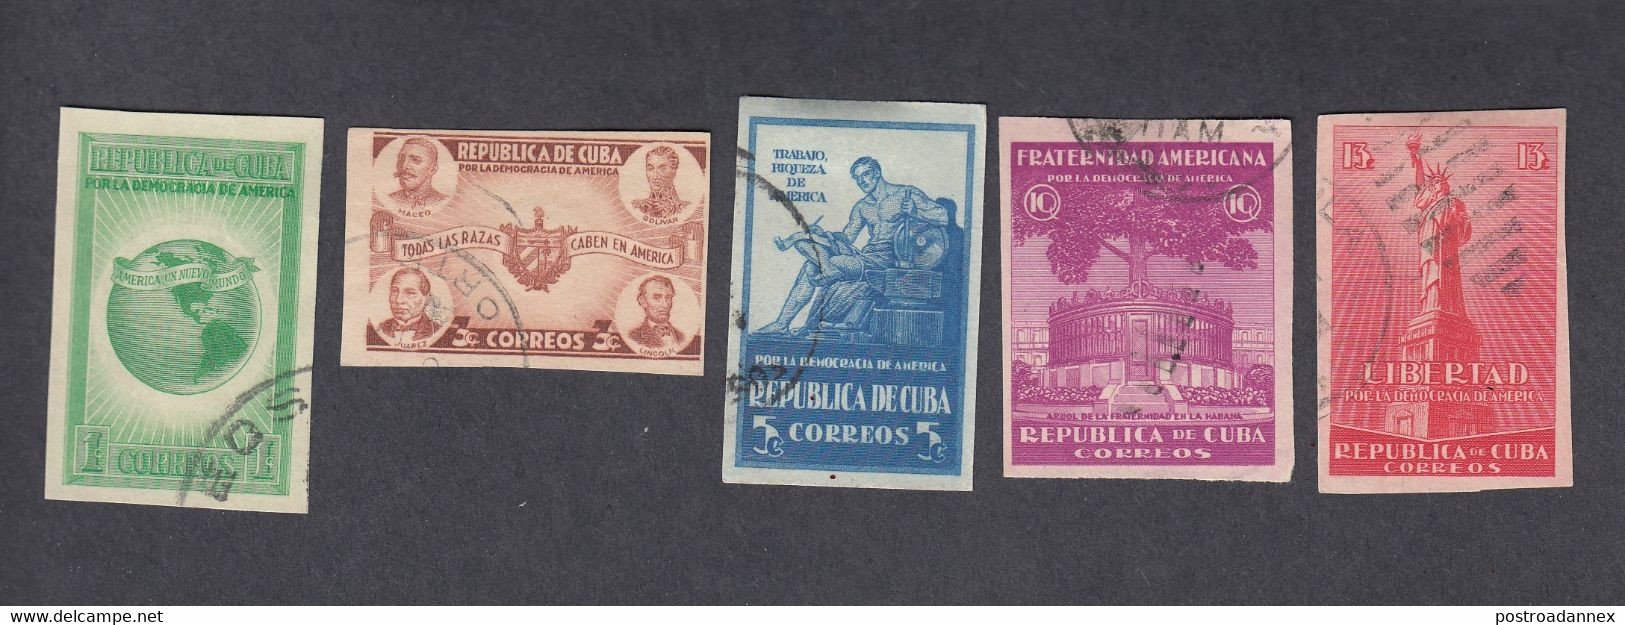 Cuba, Scott #368-372 Imperf, Used, Spirit Of Democracy, Issued 1942 - Used Stamps